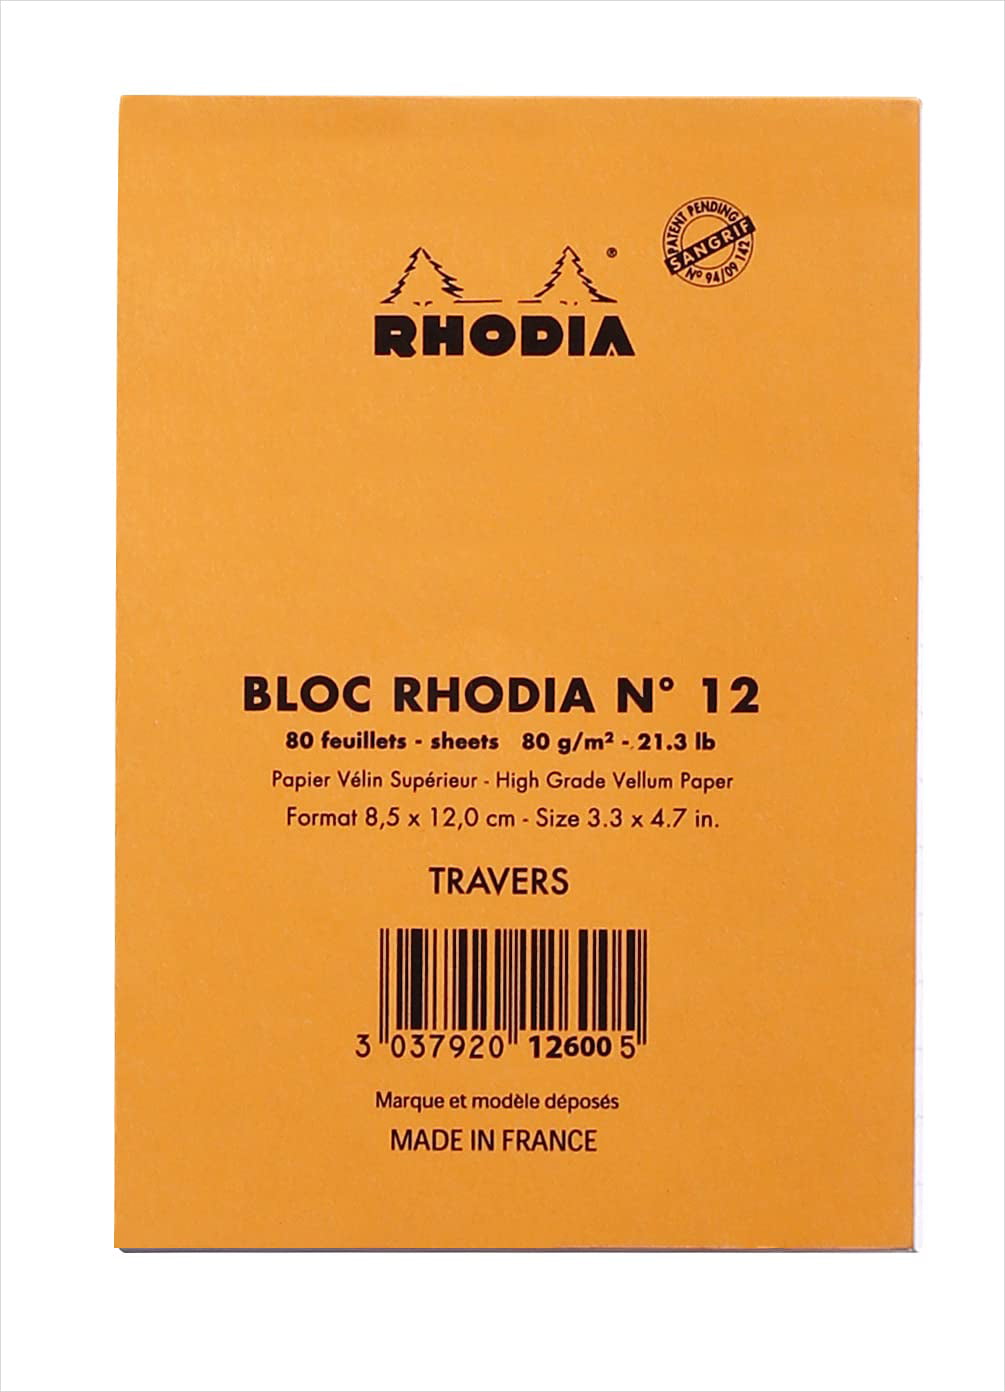 4 3/8 x 6 3/8 in Rhodia Staplebound Notepads Lined 80 sheets - Orange cover 